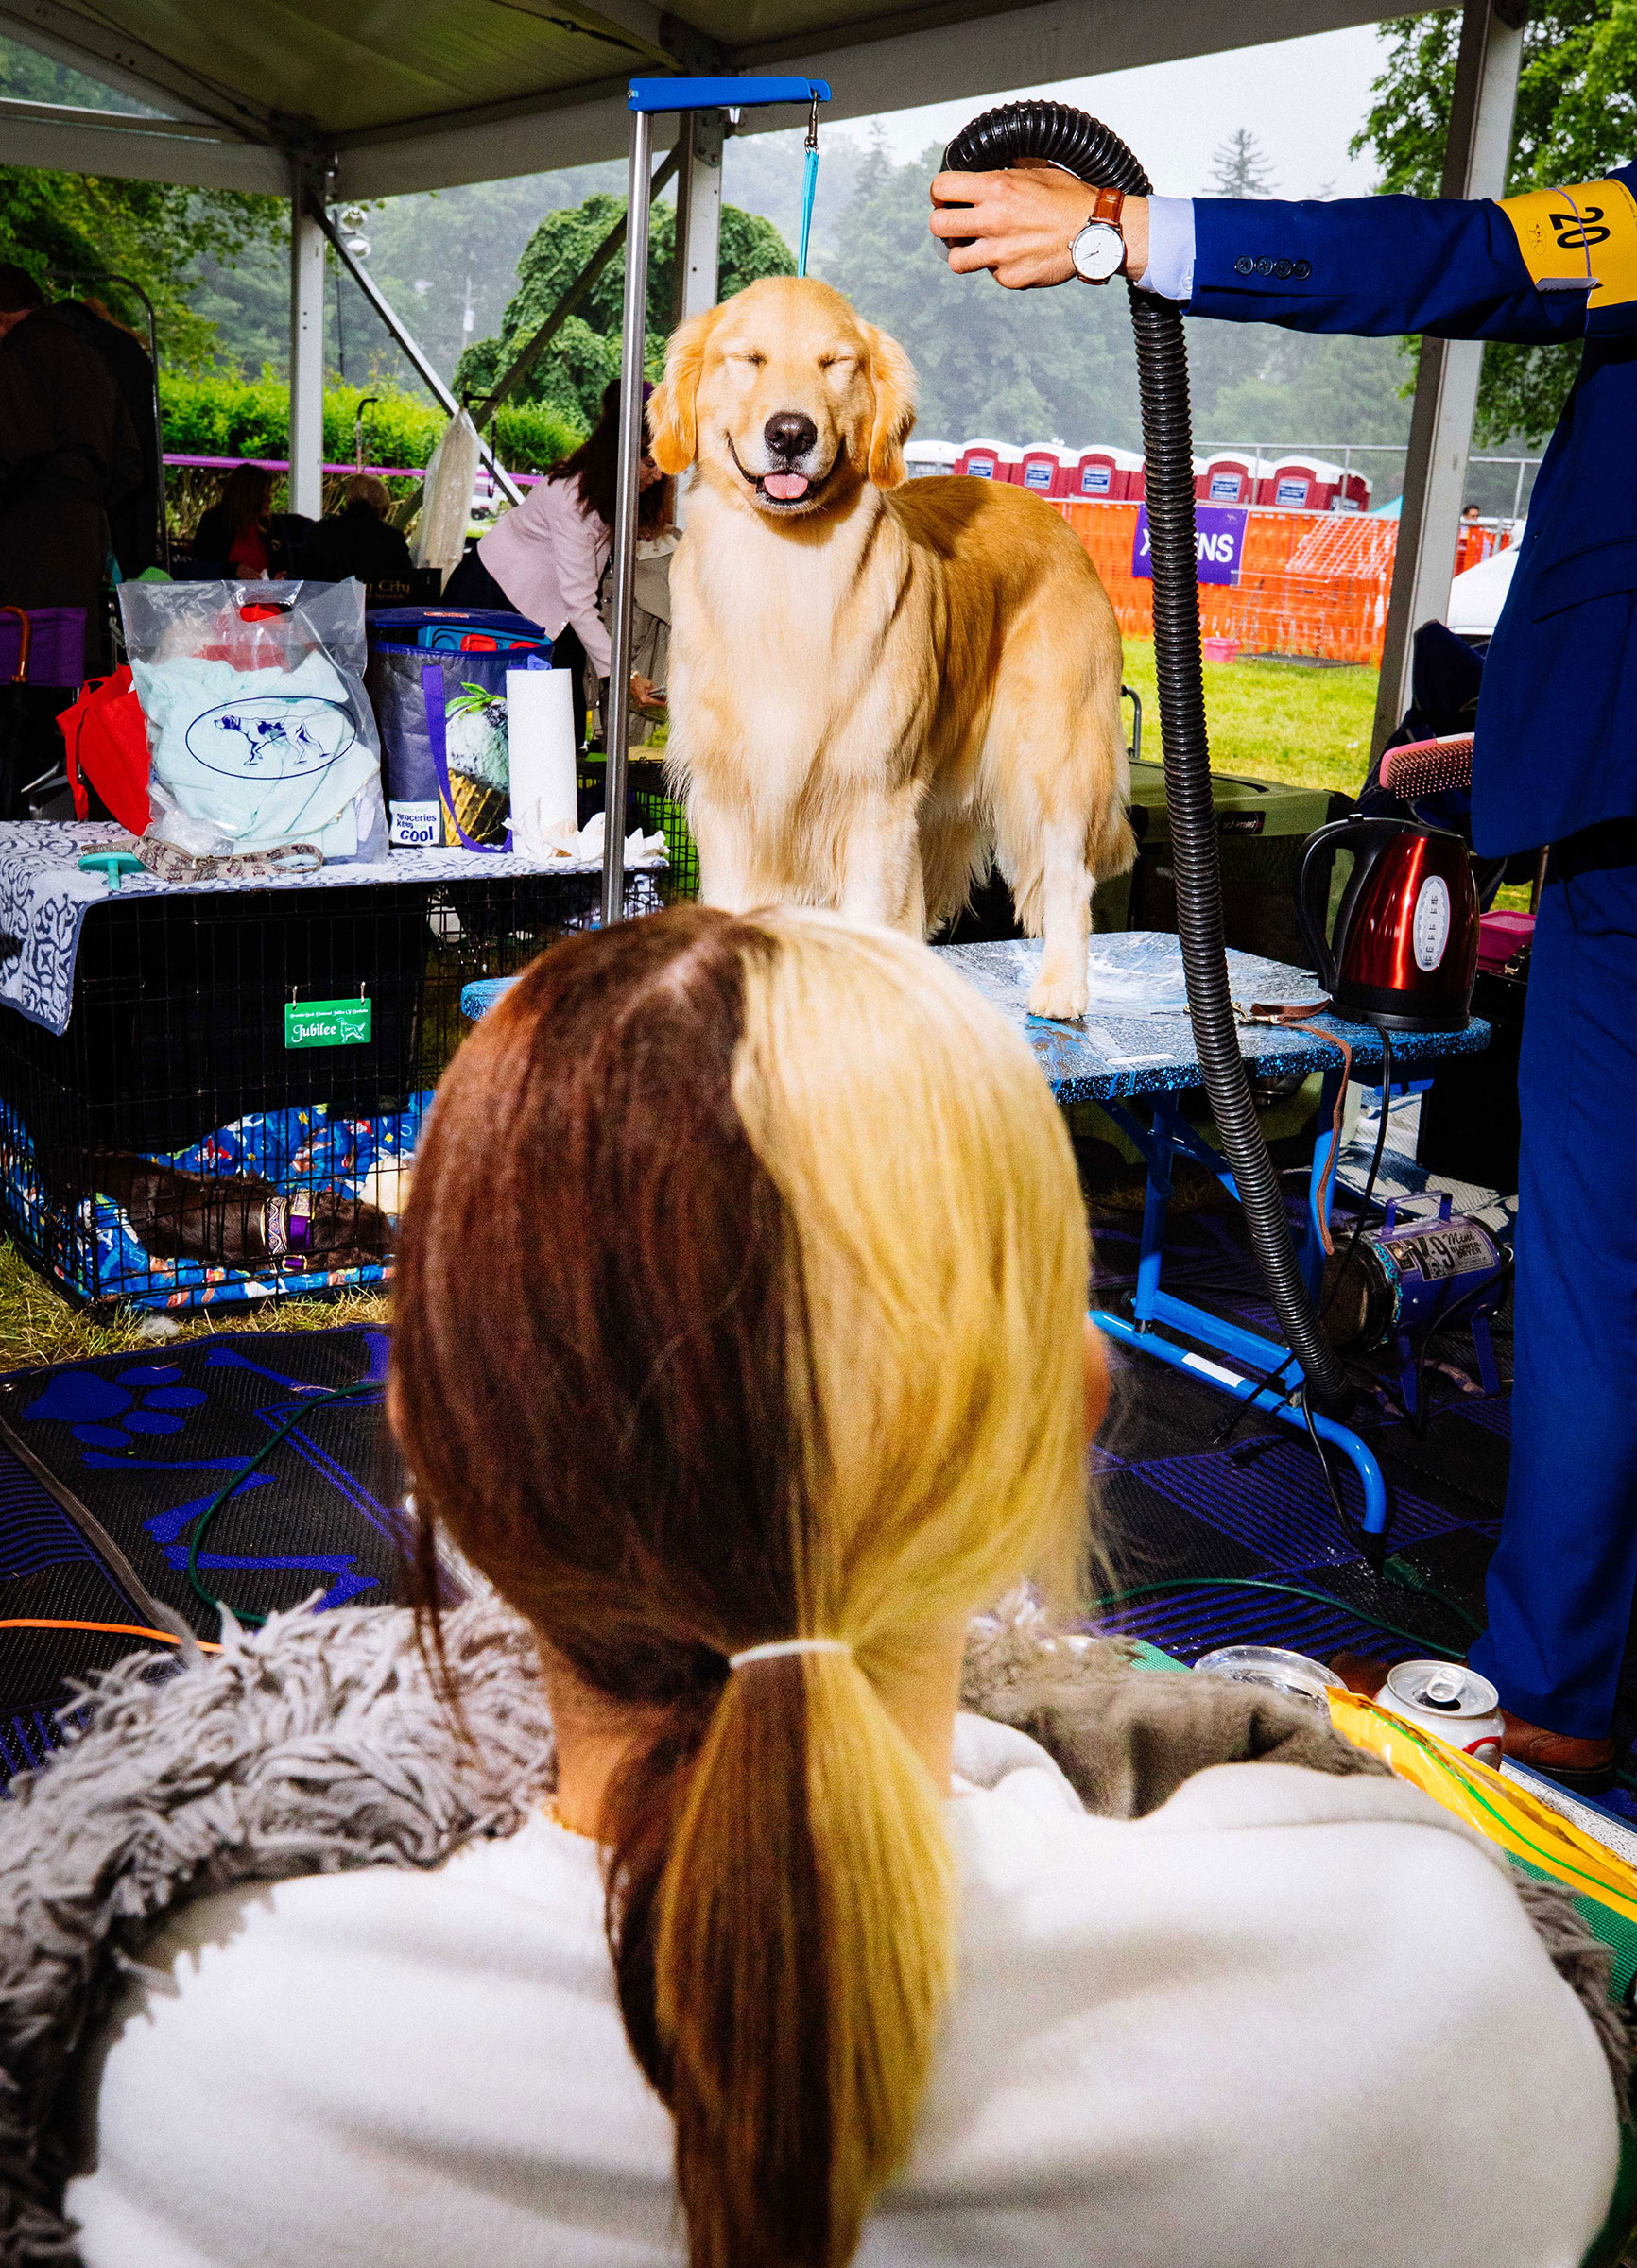 Vixen, a Golden Retriever, is groomed before competing at the 146th annual Westminster Kennel Club show in Tarrytown, NY on June 22. (Sinna Nasseri)